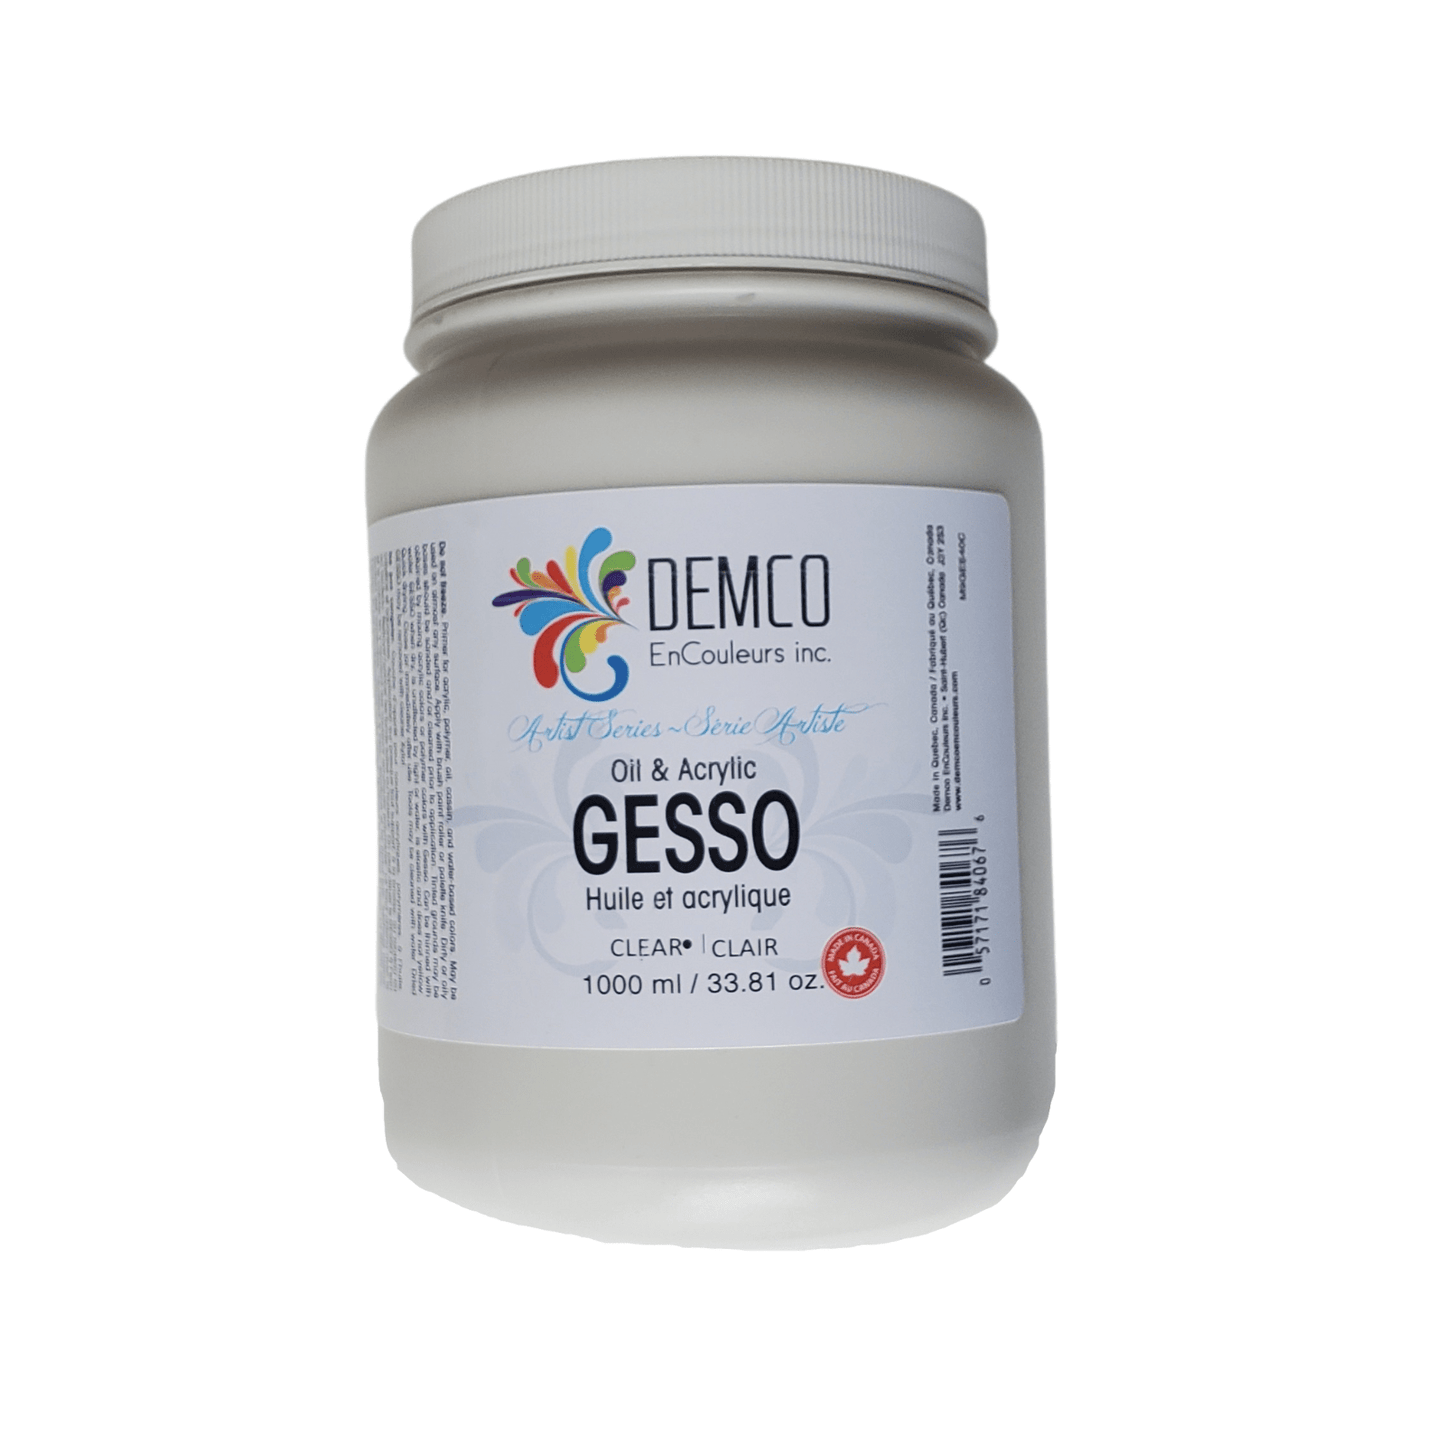 DEMCO Clear Gesso Demco - Clear Gesso - 1000mL Jar - Item #M9GES40C